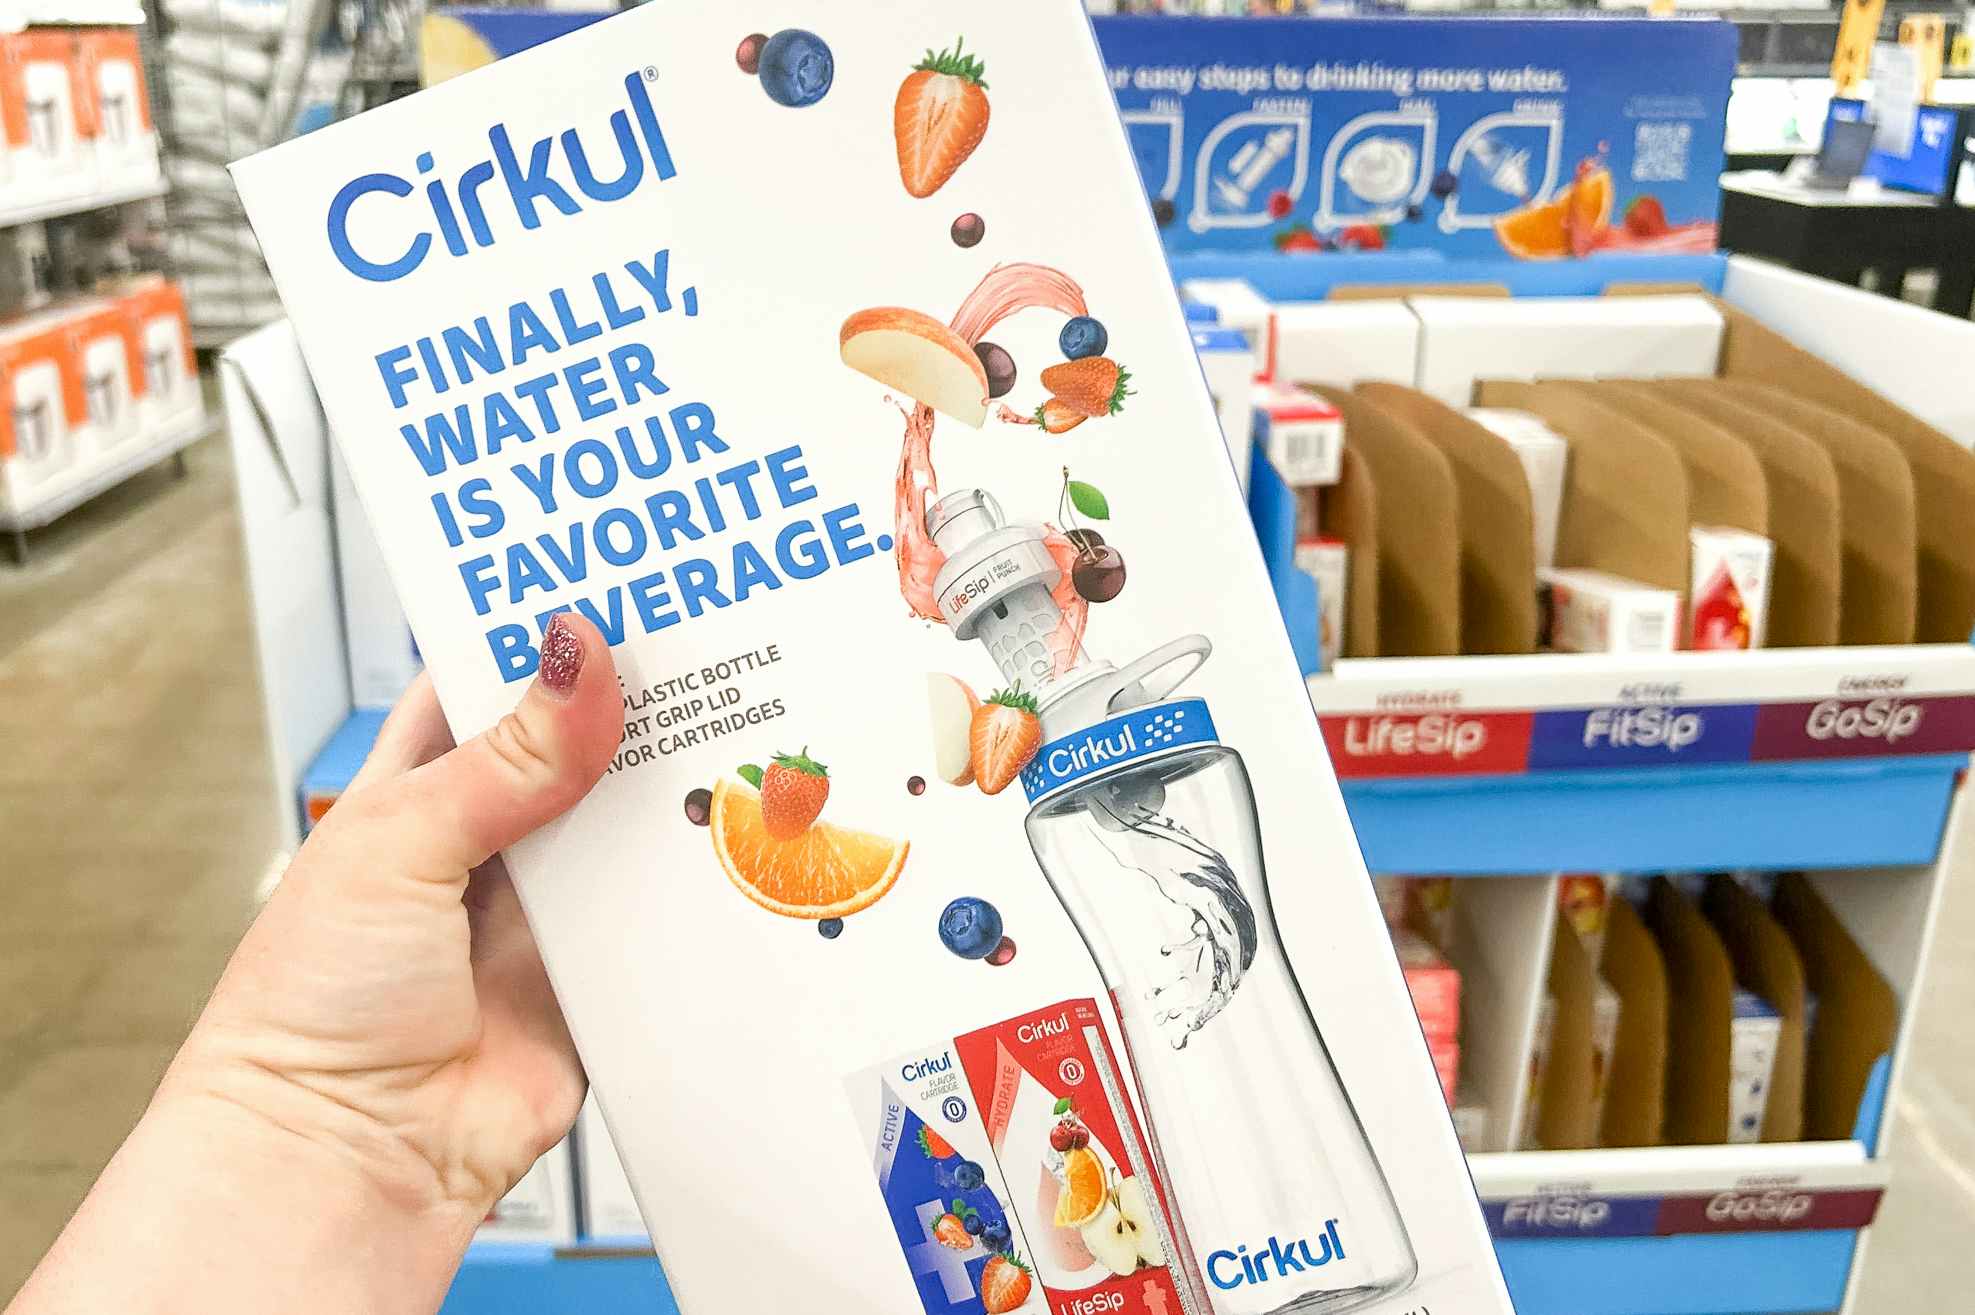 Someone holding up a Cirkul water bottle box in a Walmart store